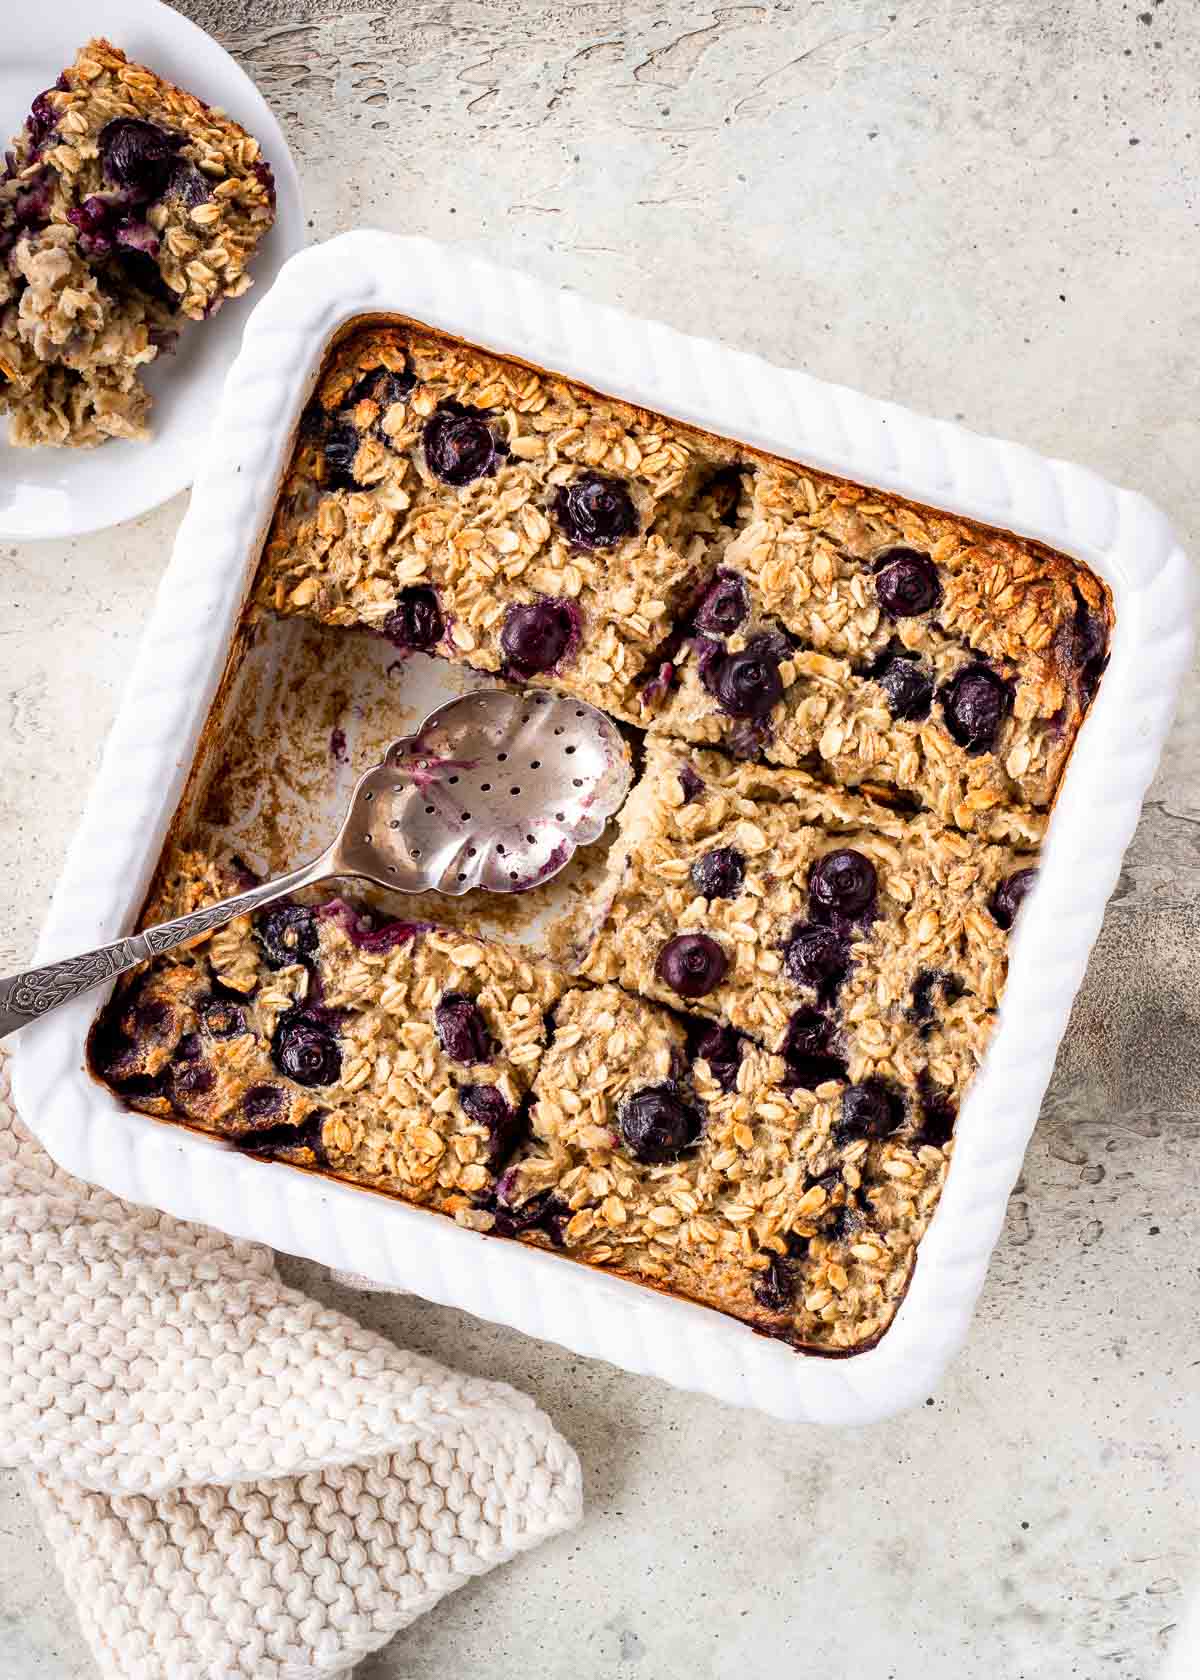 A large white tray of vegan baked oatmeal cut into slices and studded with blueberries. A spoon has already taken a slice out.